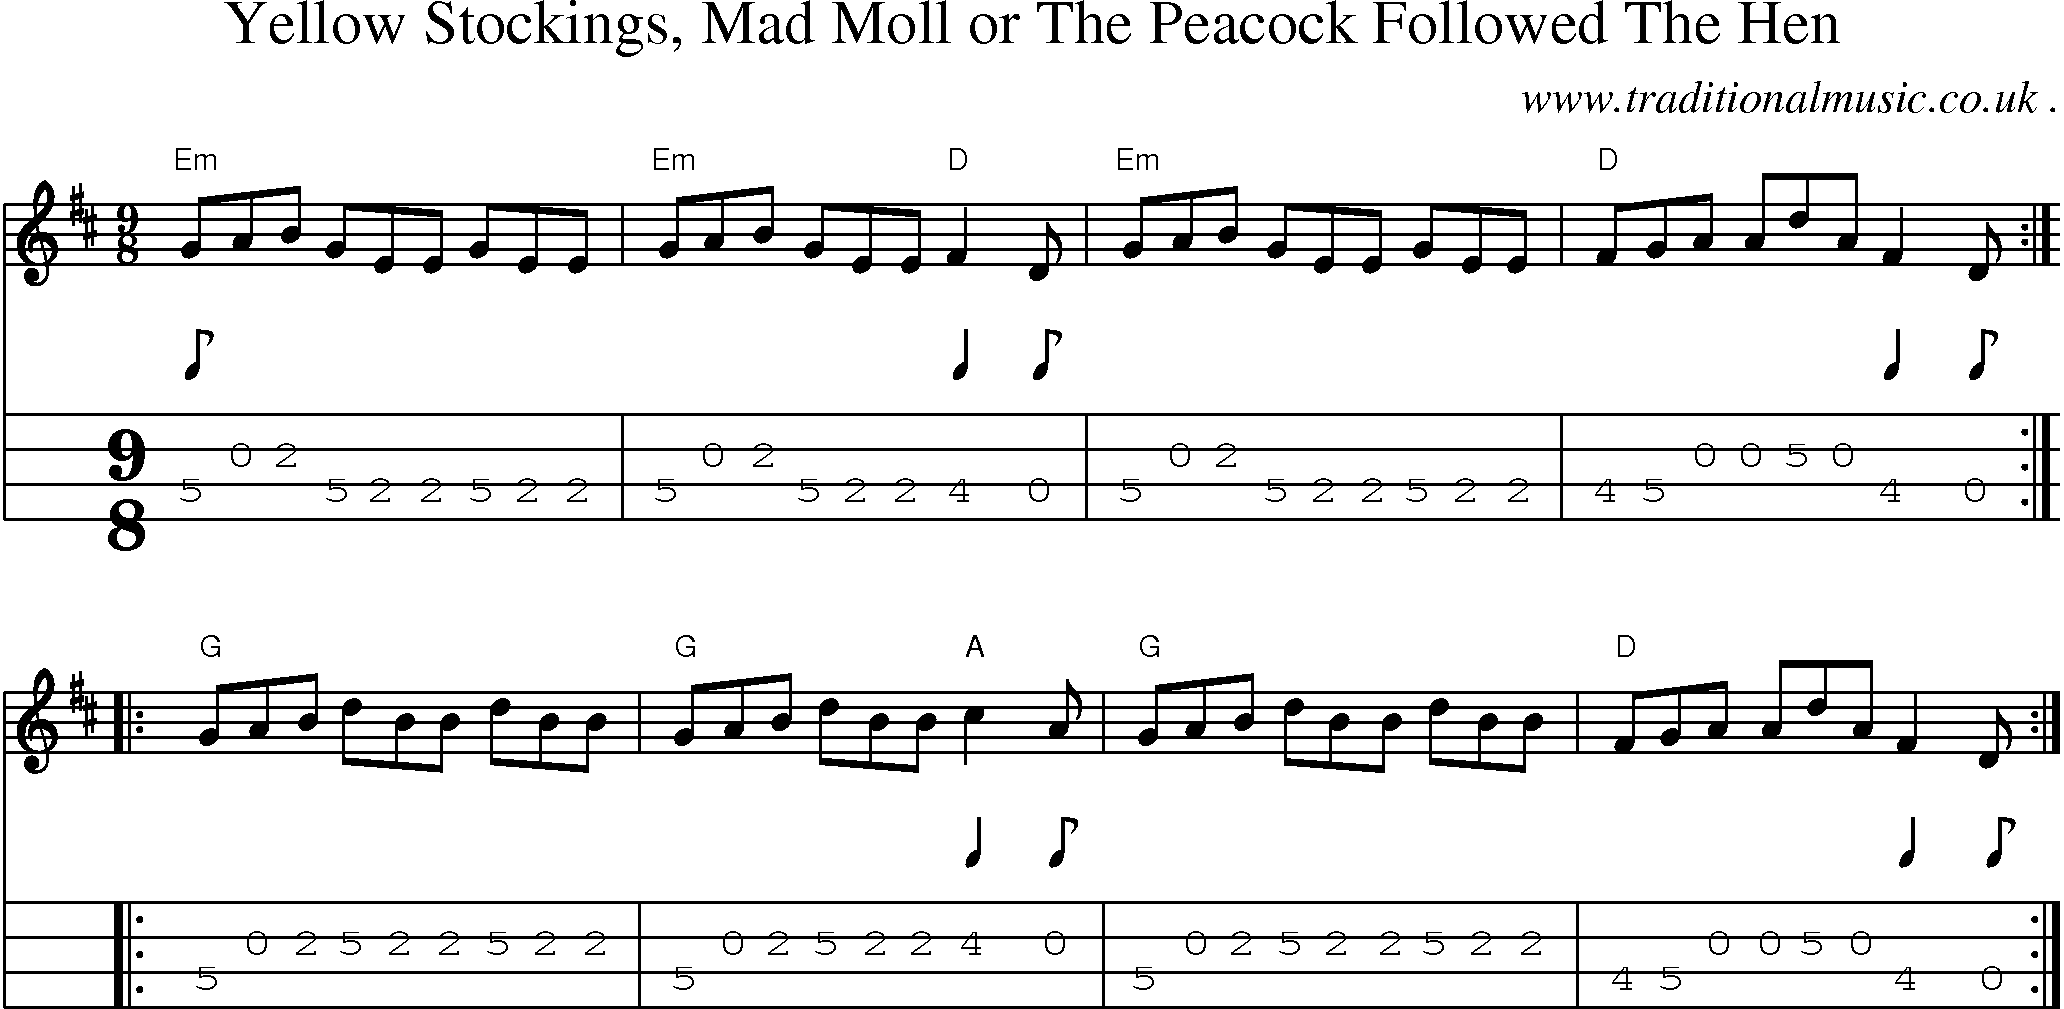 Sheet-Music and Mandolin Tabs for Yellow Stockings Mad Moll Or The Peacock Followed The Hen